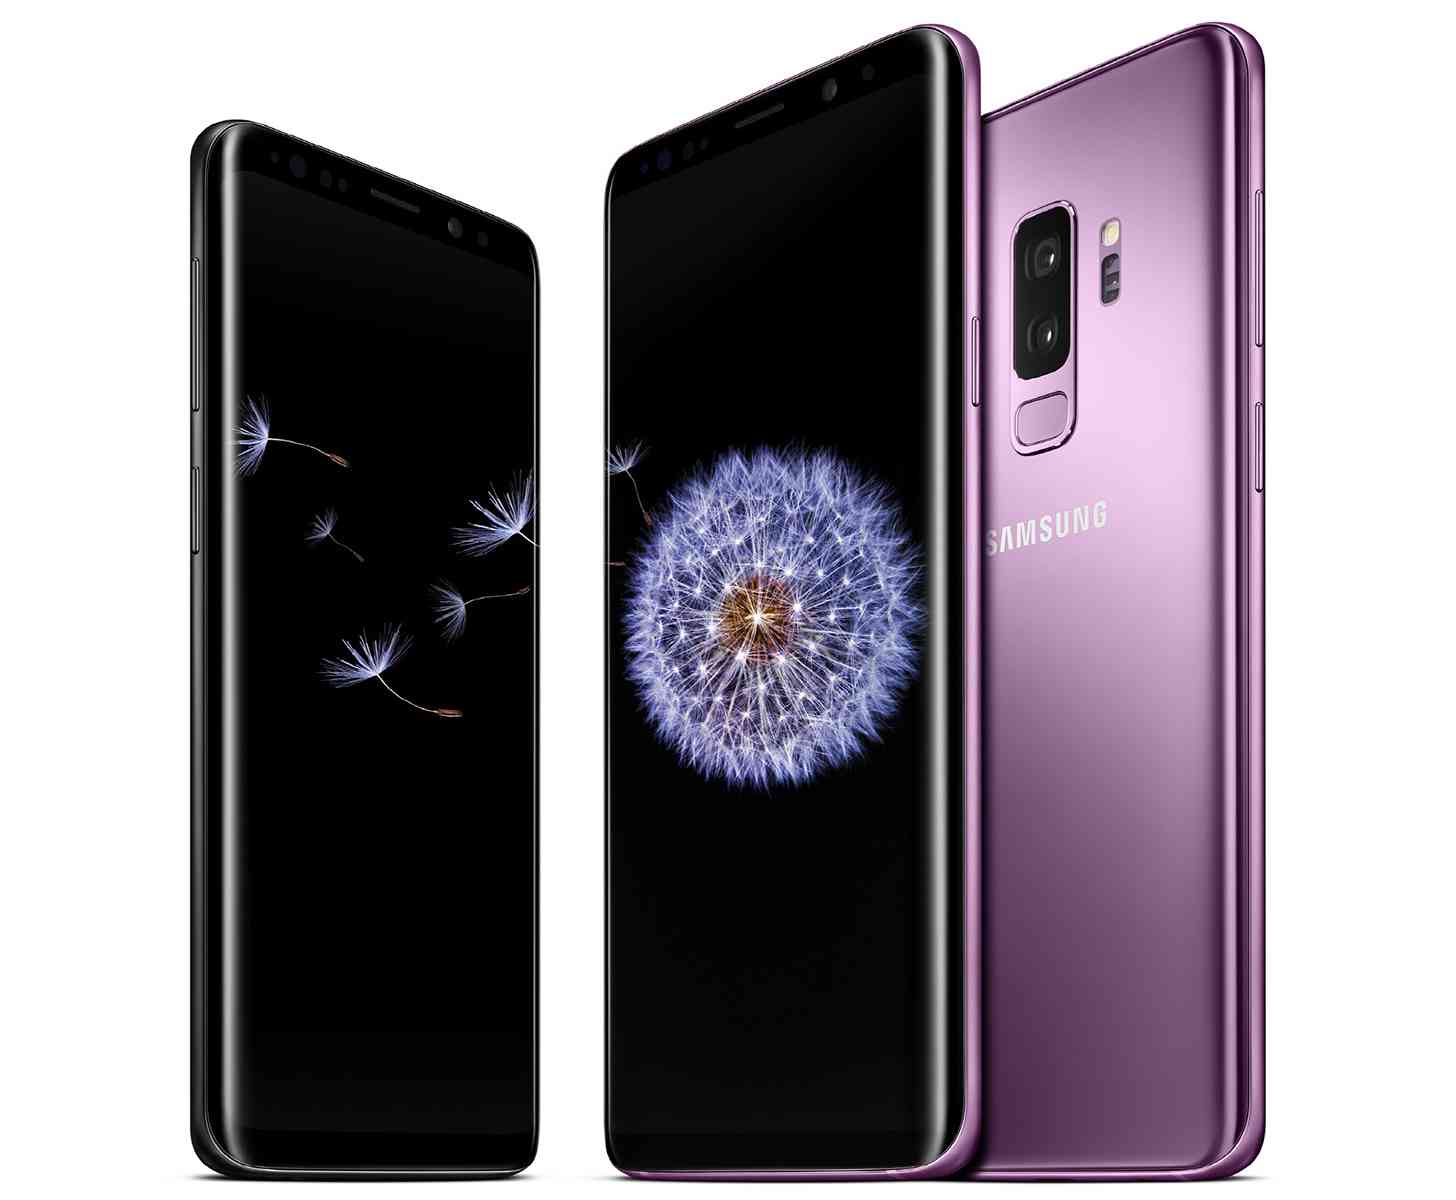 Samsung Galaxy S9+ Lilac Purple official